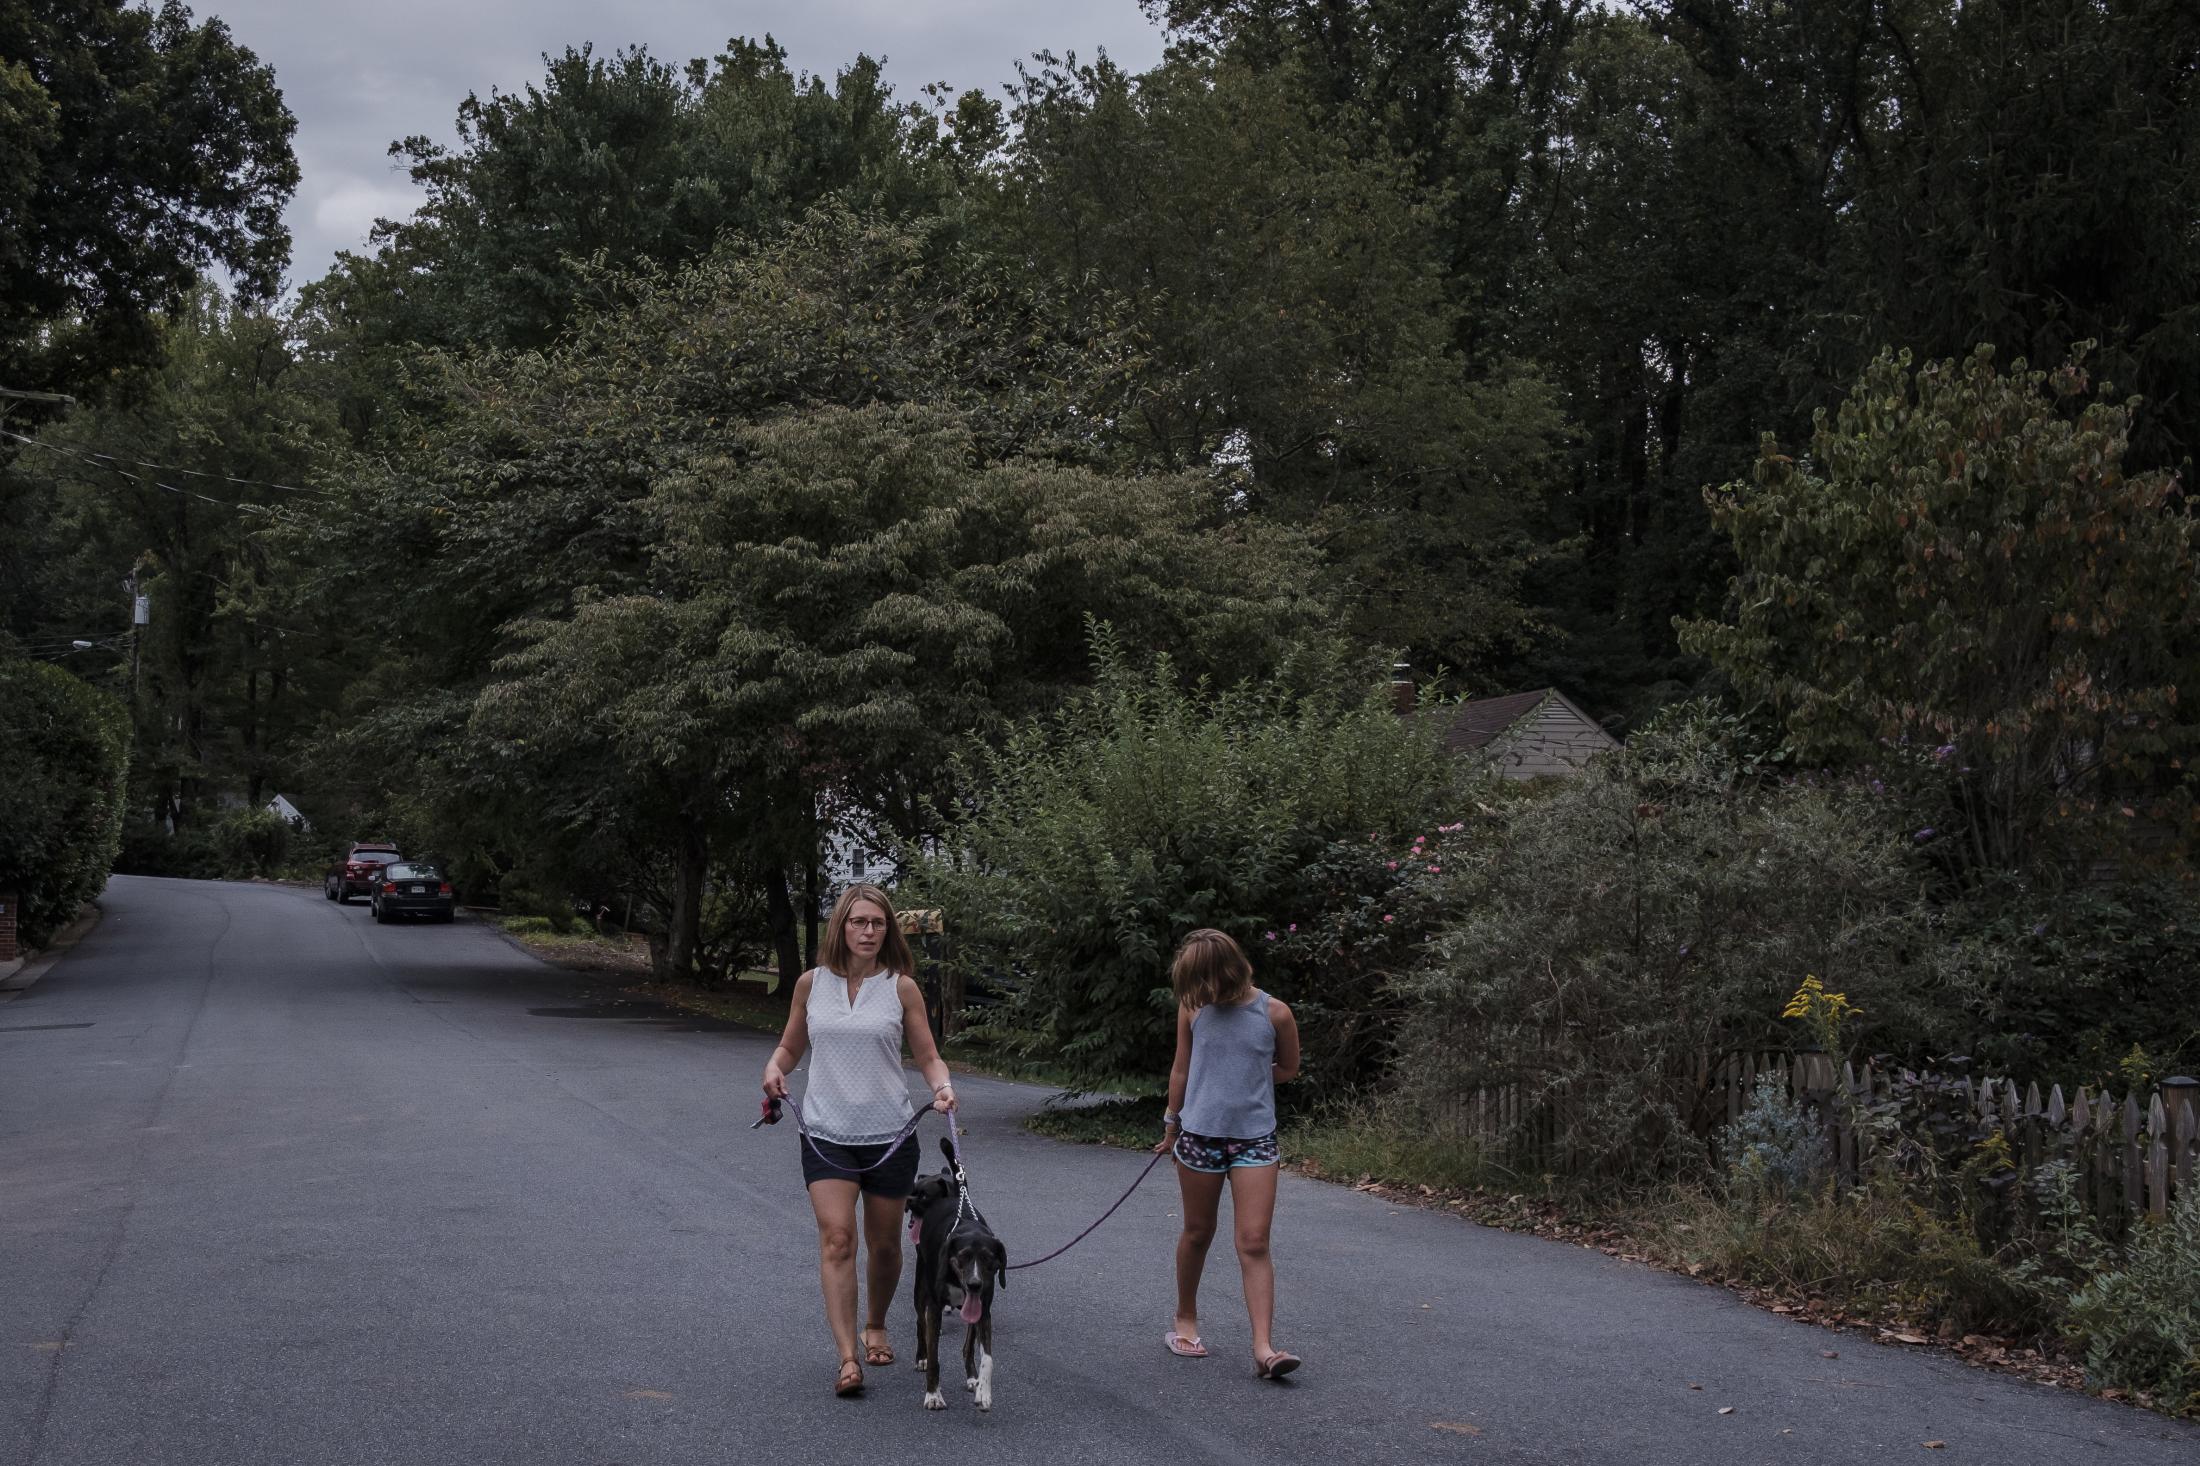 Jeri Seidman and her daughter Hannah taking their dogs Perri (Boxer) and Quin (Hound) for a walk in Charlottesville, Virginia, U.S., on Monday Sept. 23, 2019. Hannah is a patient in a genetic risk study about type 1 diabetes at University of Virginia. Photographer: Carlos Bernate/ NPR